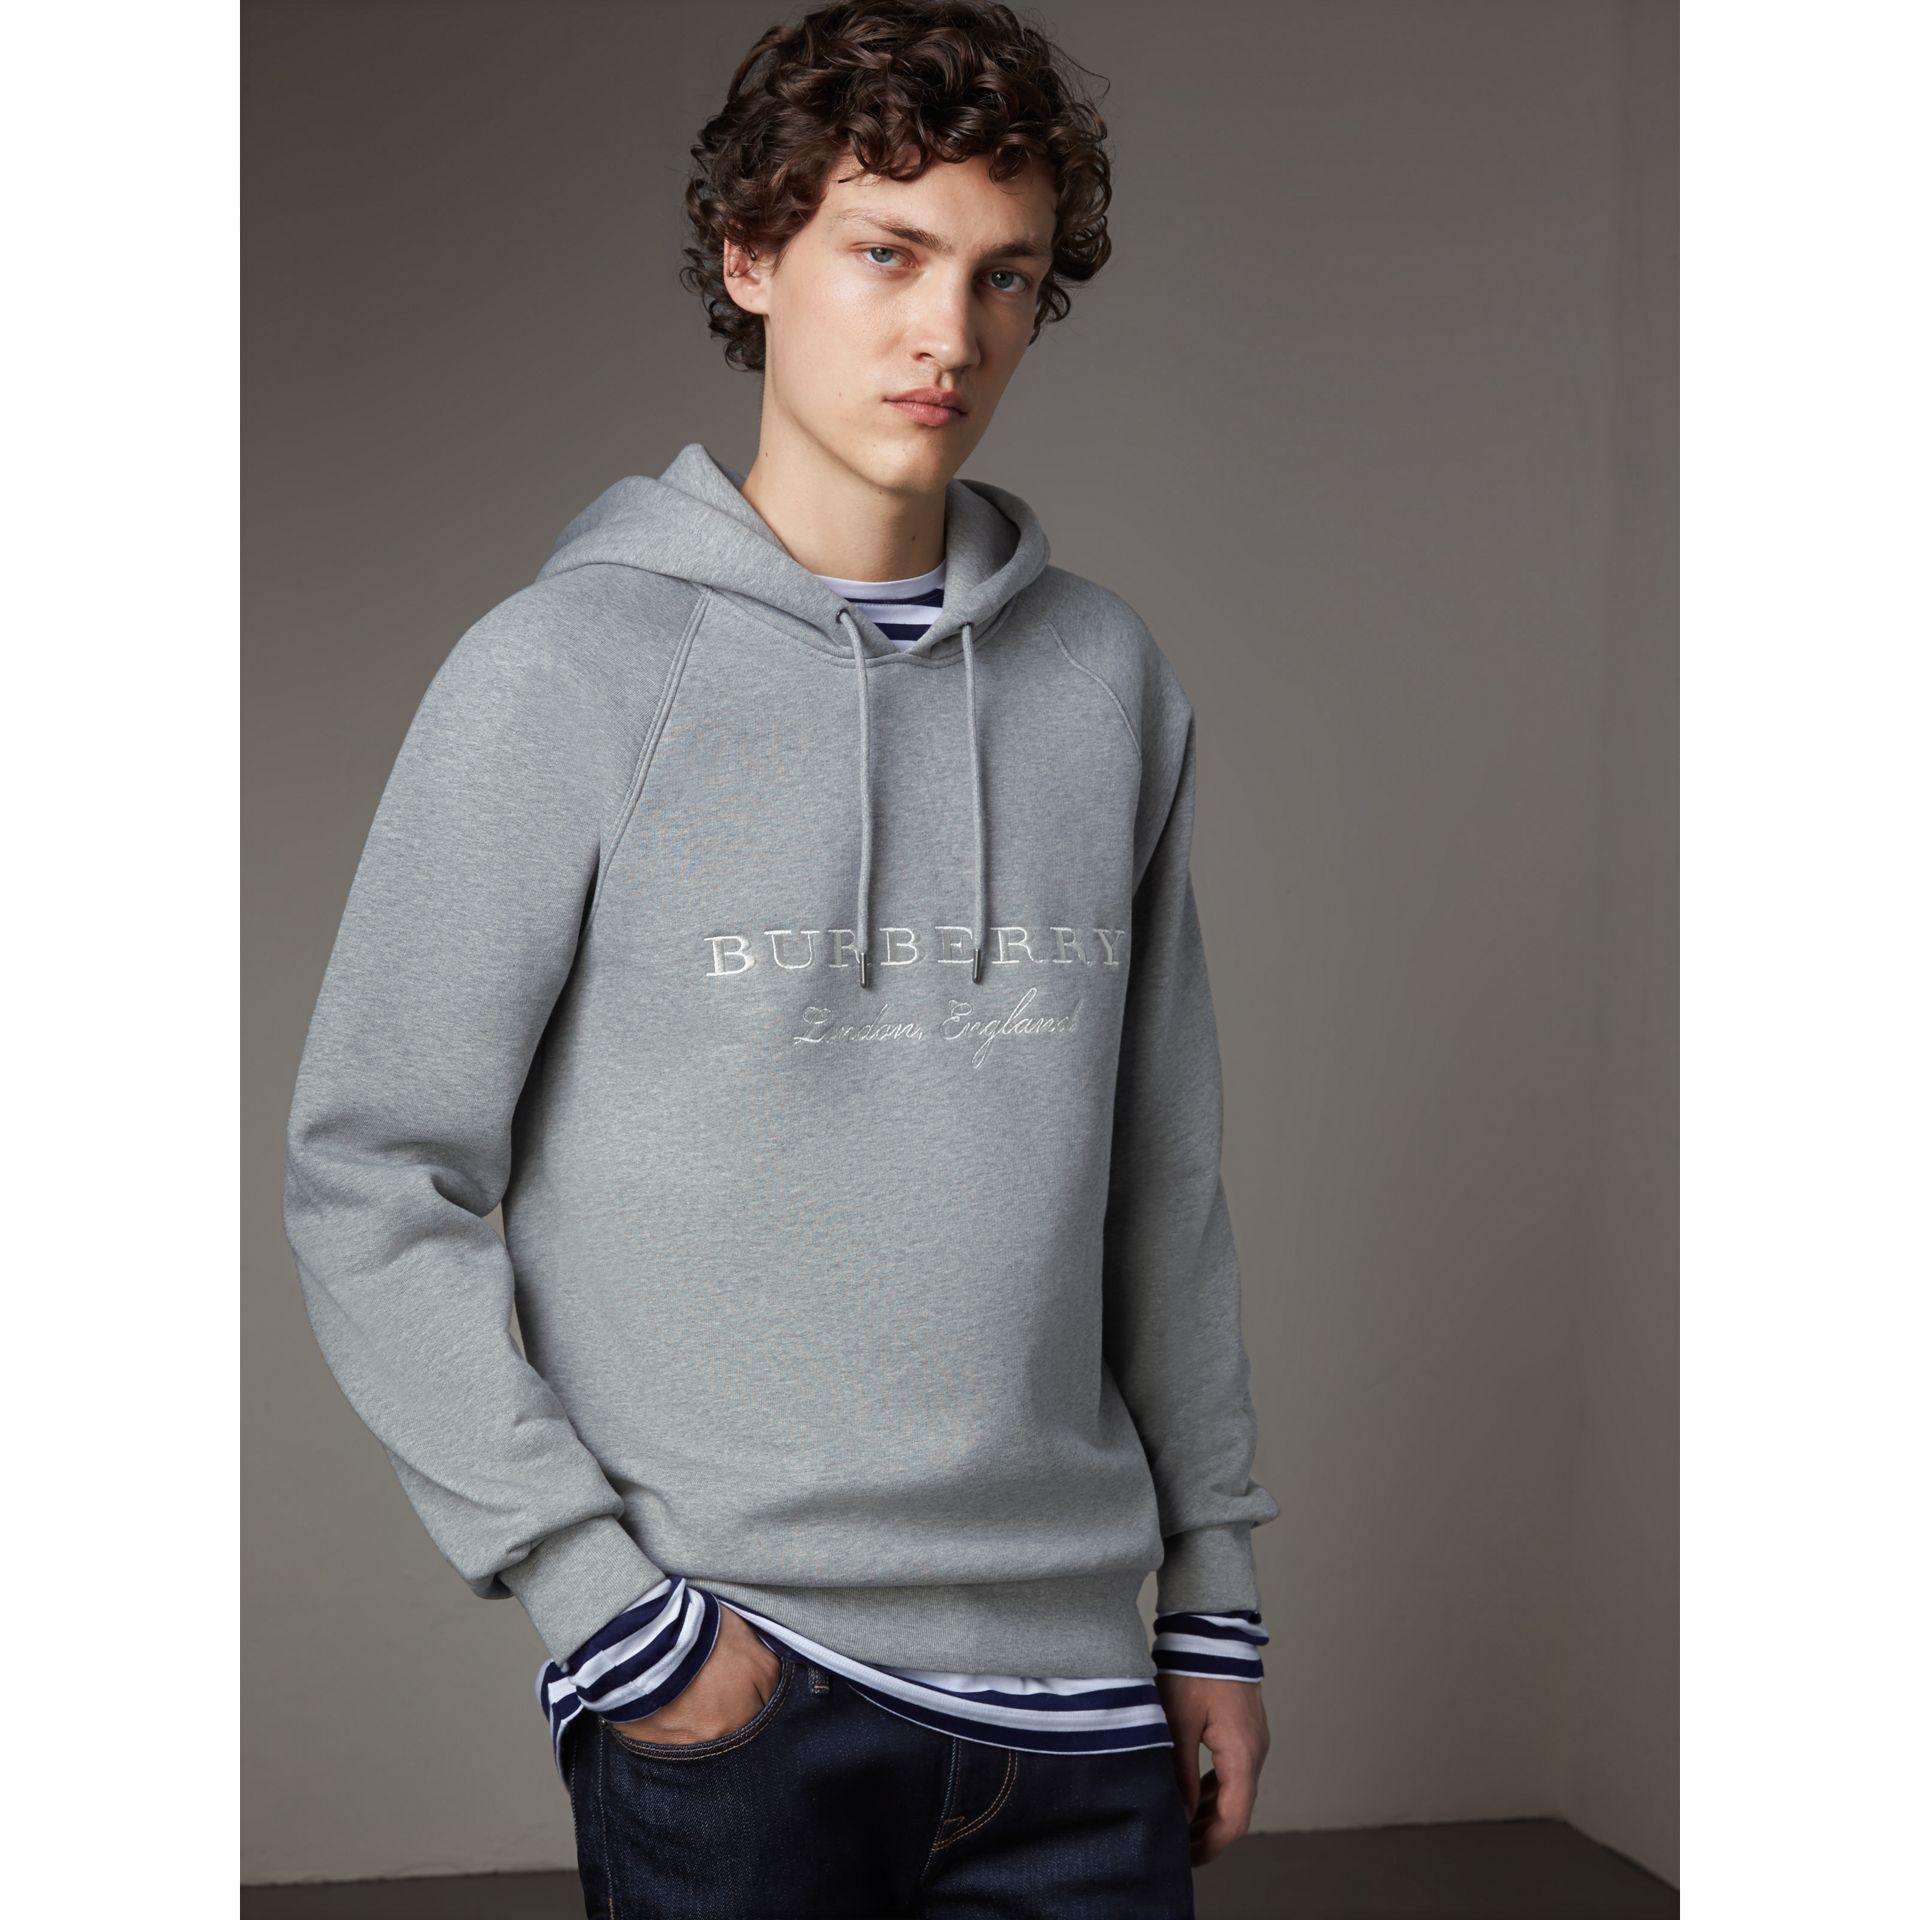 Burberry Embroidered Hooded Sweatshirt Grey Melange in Gray for